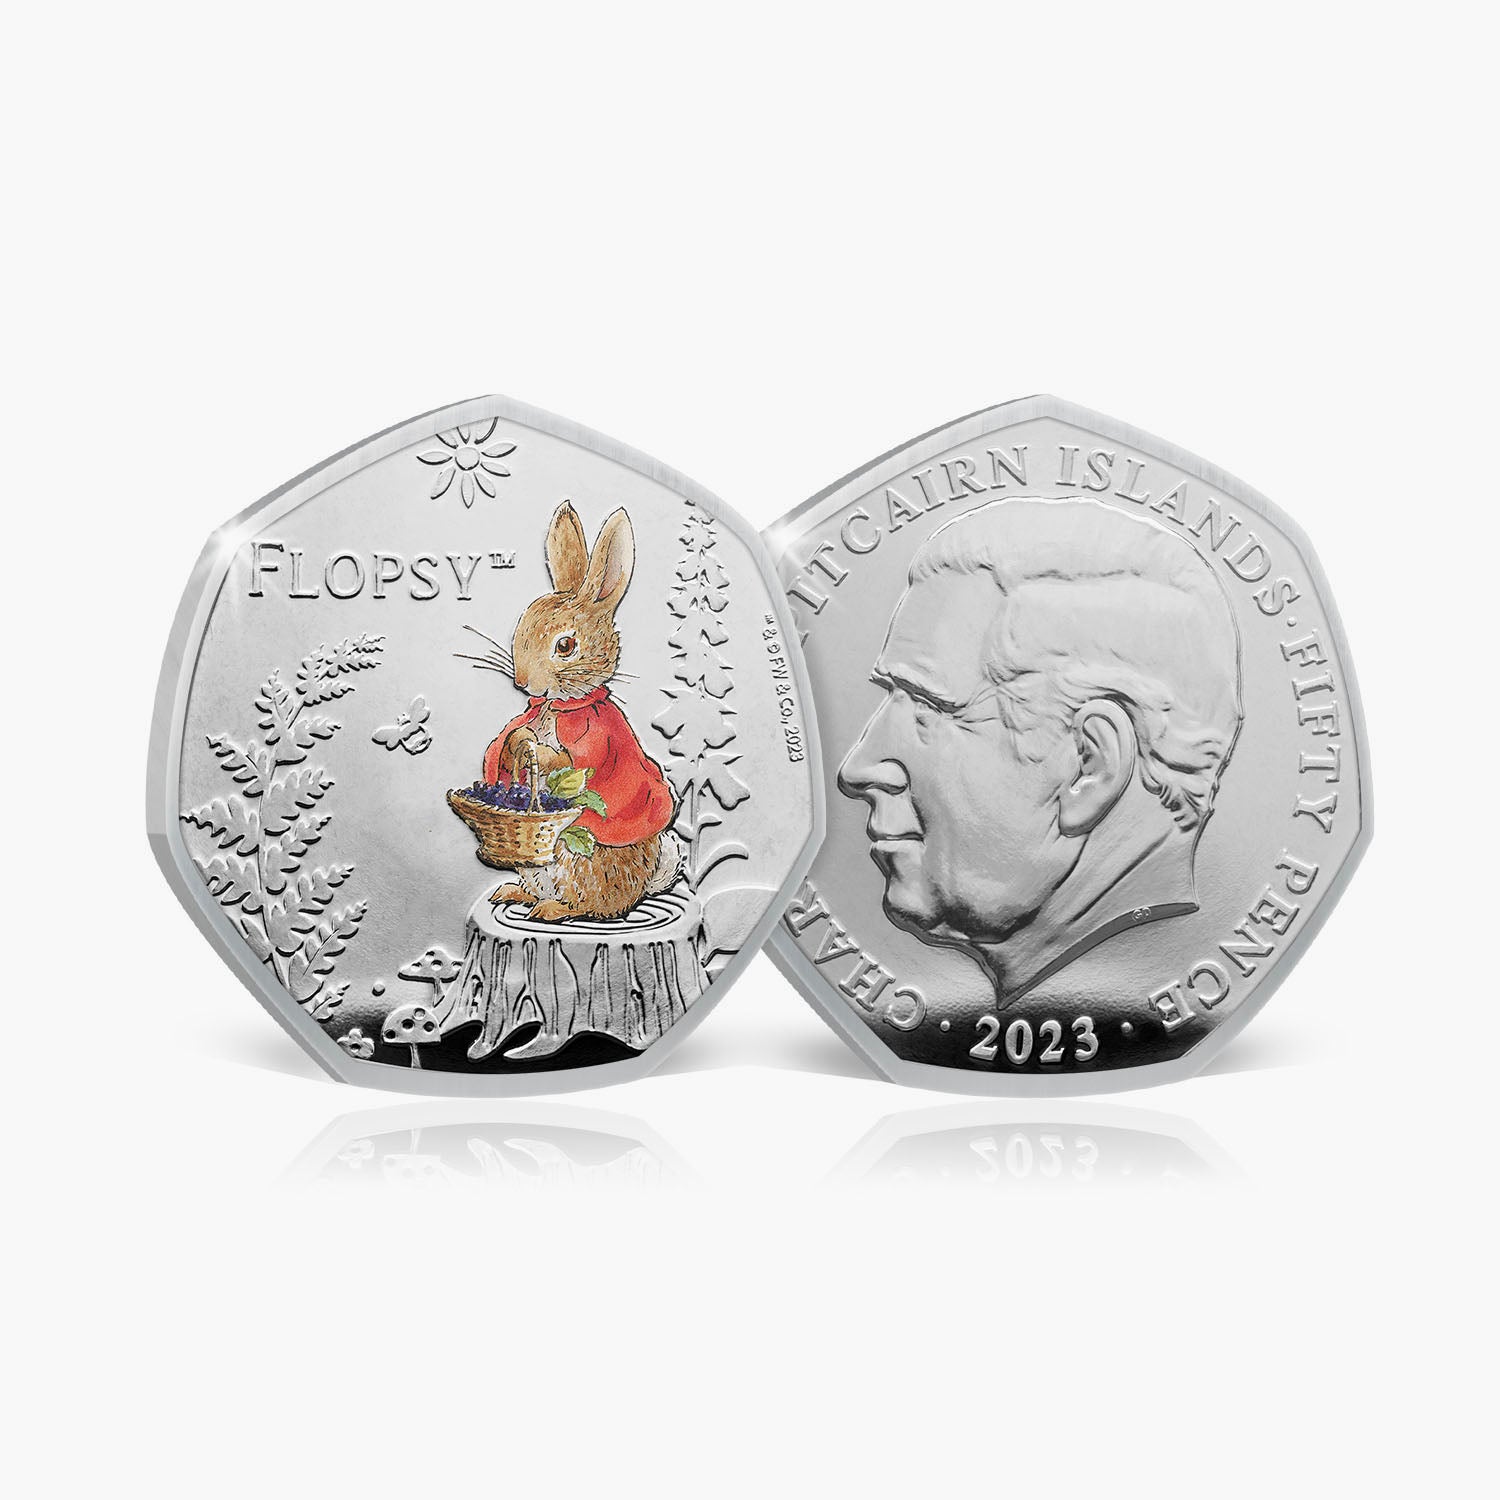 The World of Peter Rabbit 2023 Colour Coin Collection